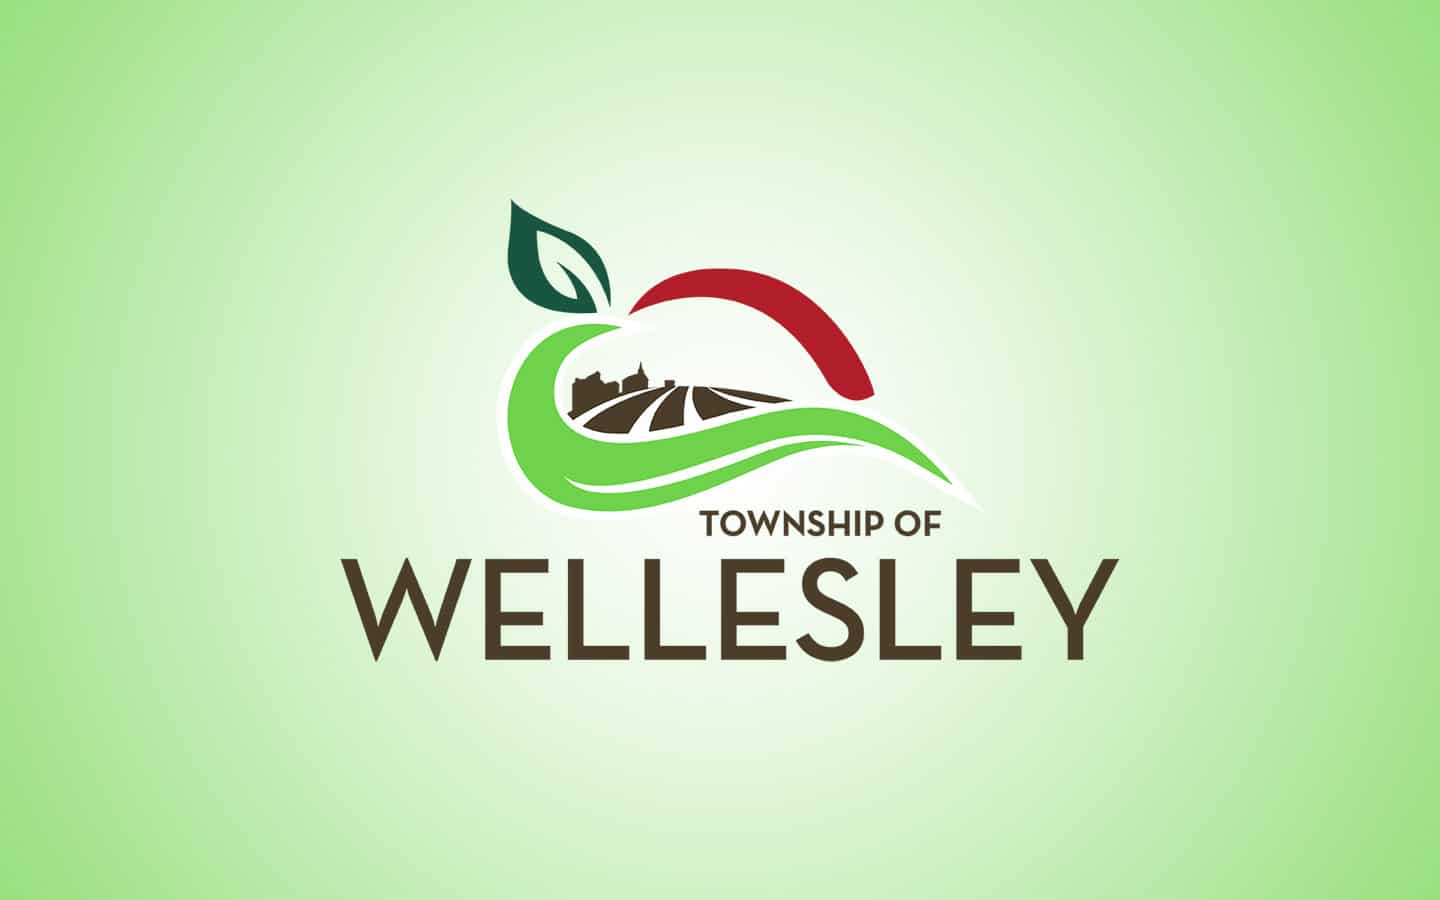 Wellesley to spread cost of septic-system inspections to residents